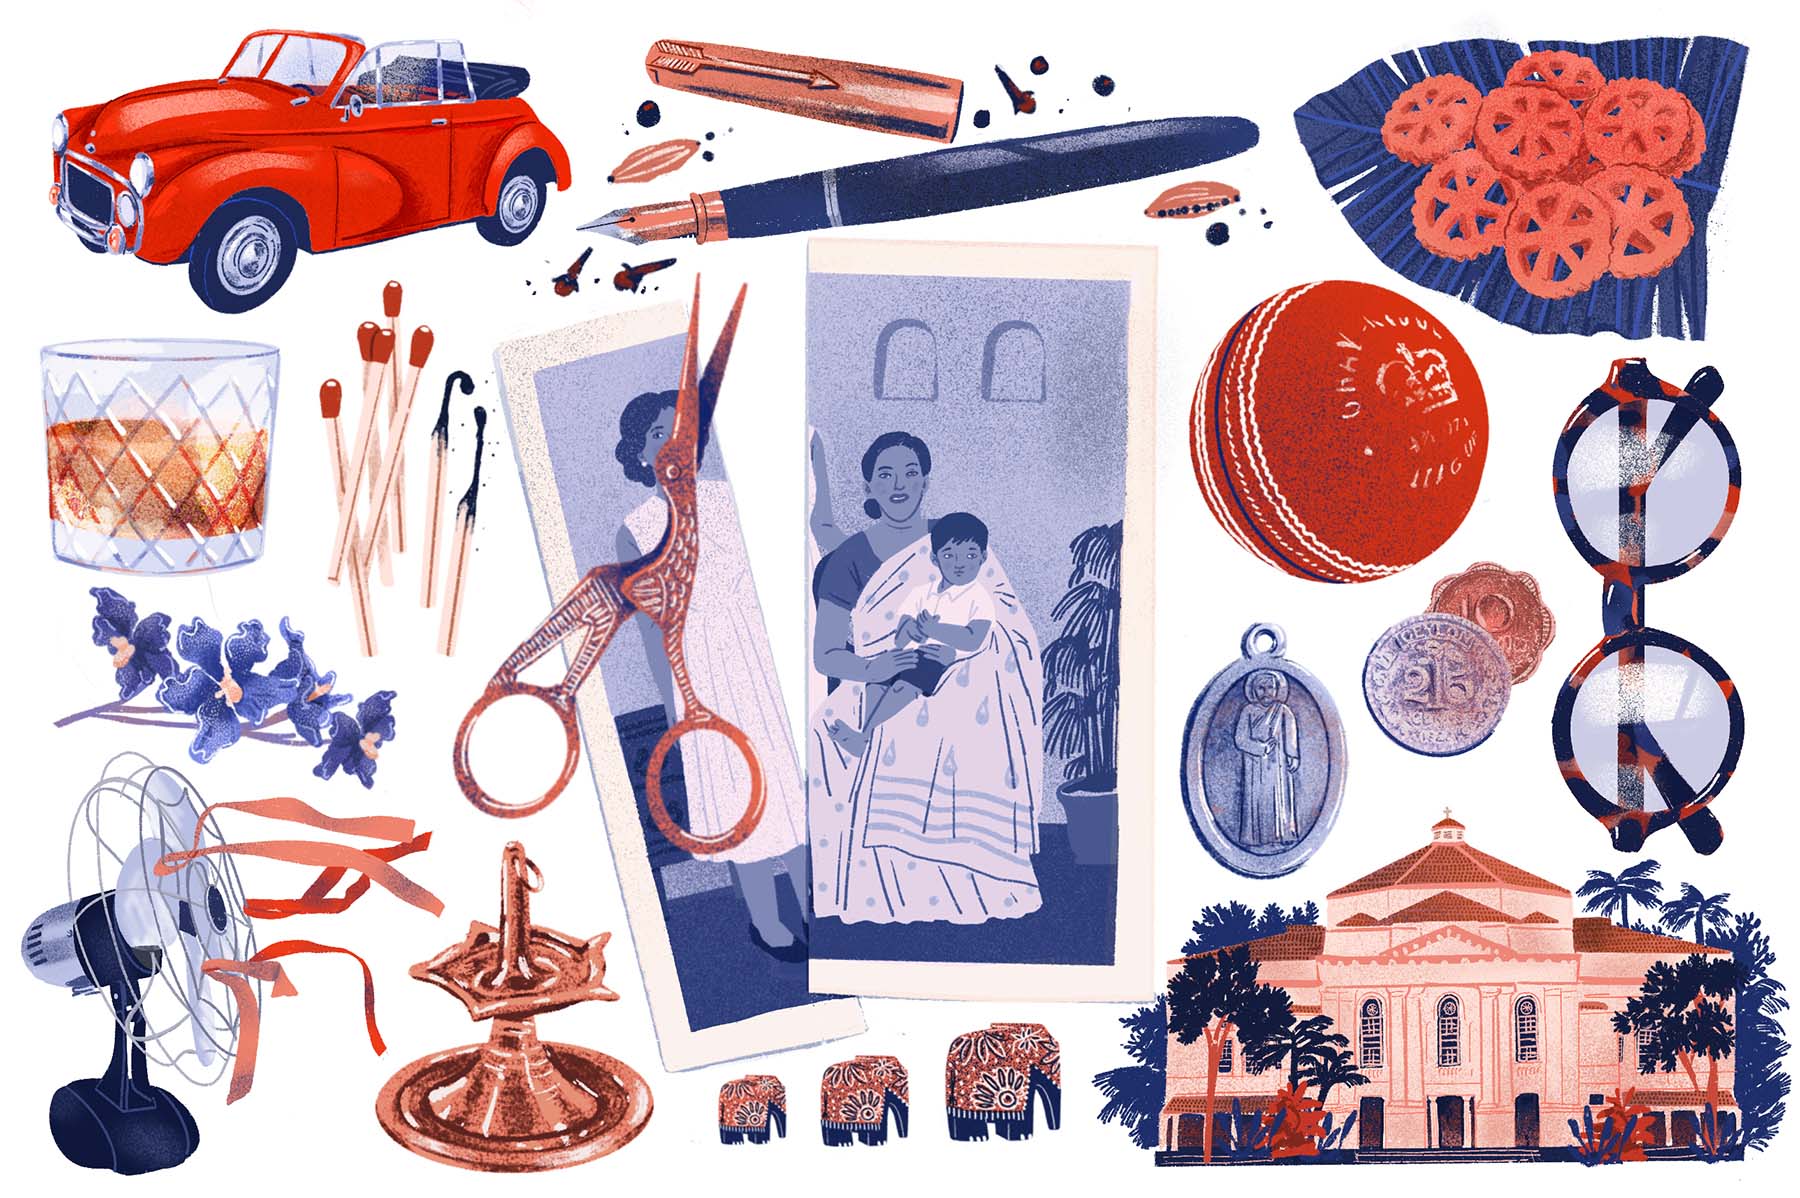 Illustrations of glasses, matches, a car, fountain pen, amulet, leaves, coins, flowers, fountains and a large house surround a black-and-white photo of a Sri Lankan family snipped by bird-shaped scissors.